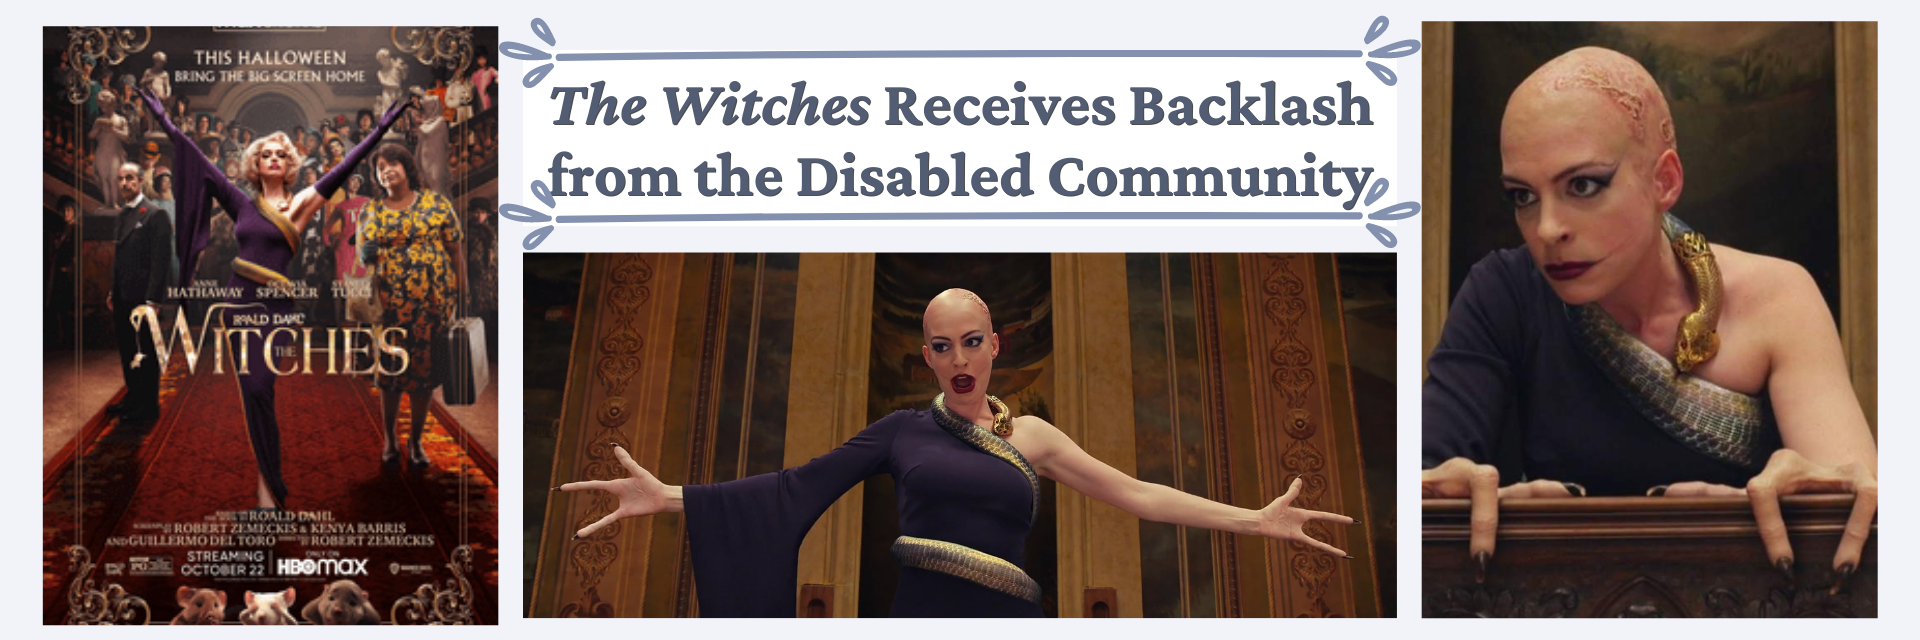 Text: The Witches Receives Backlash from the Disabled Community; Images: Anne Hathaway as the Grand High Witch displaying what looks to be a limb difference. 